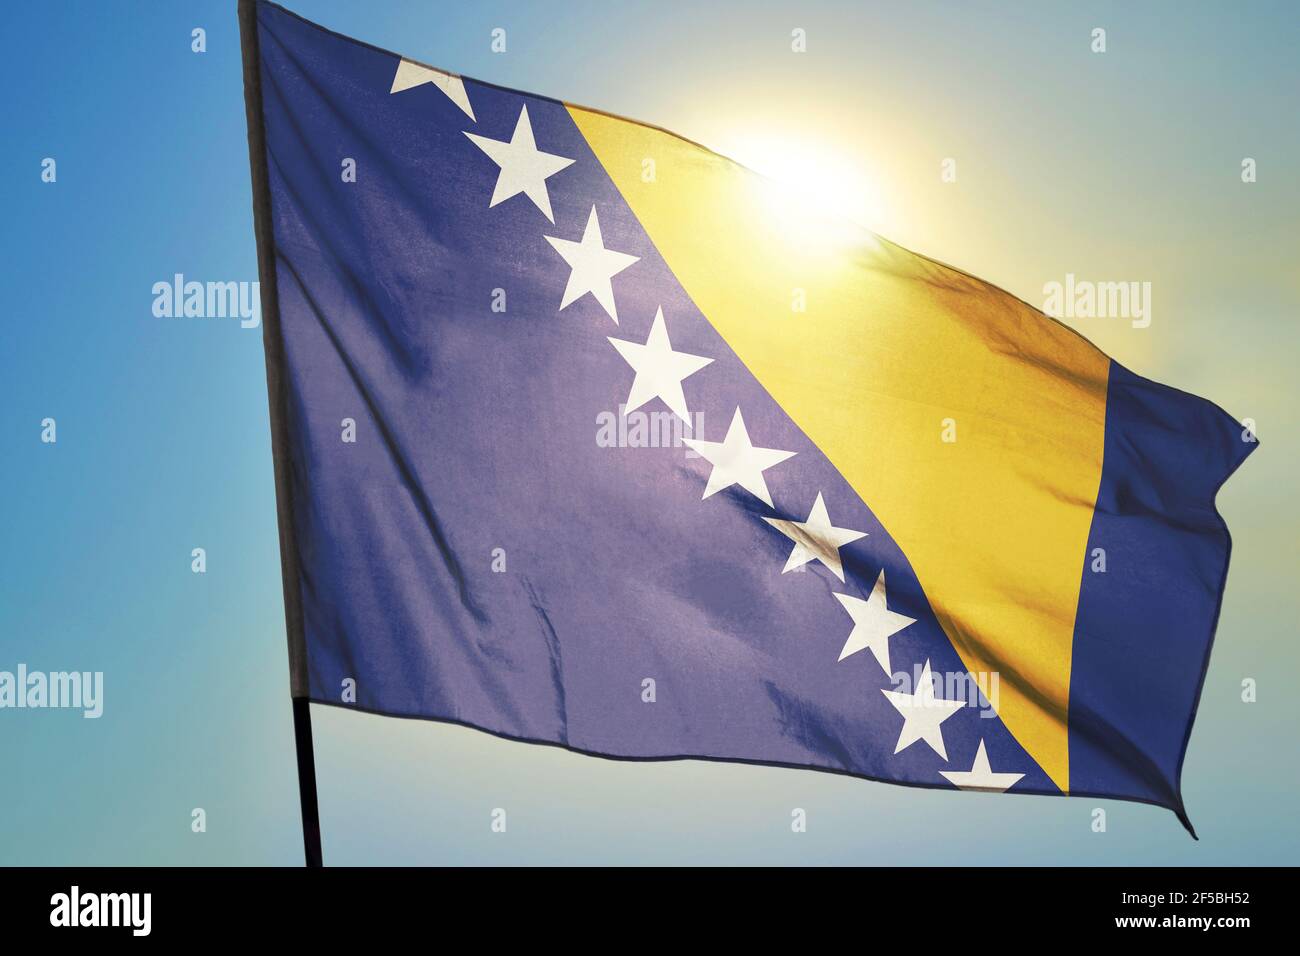 Bosnia and Herzegovina flag waving on the wind in front of sun Stock Photo